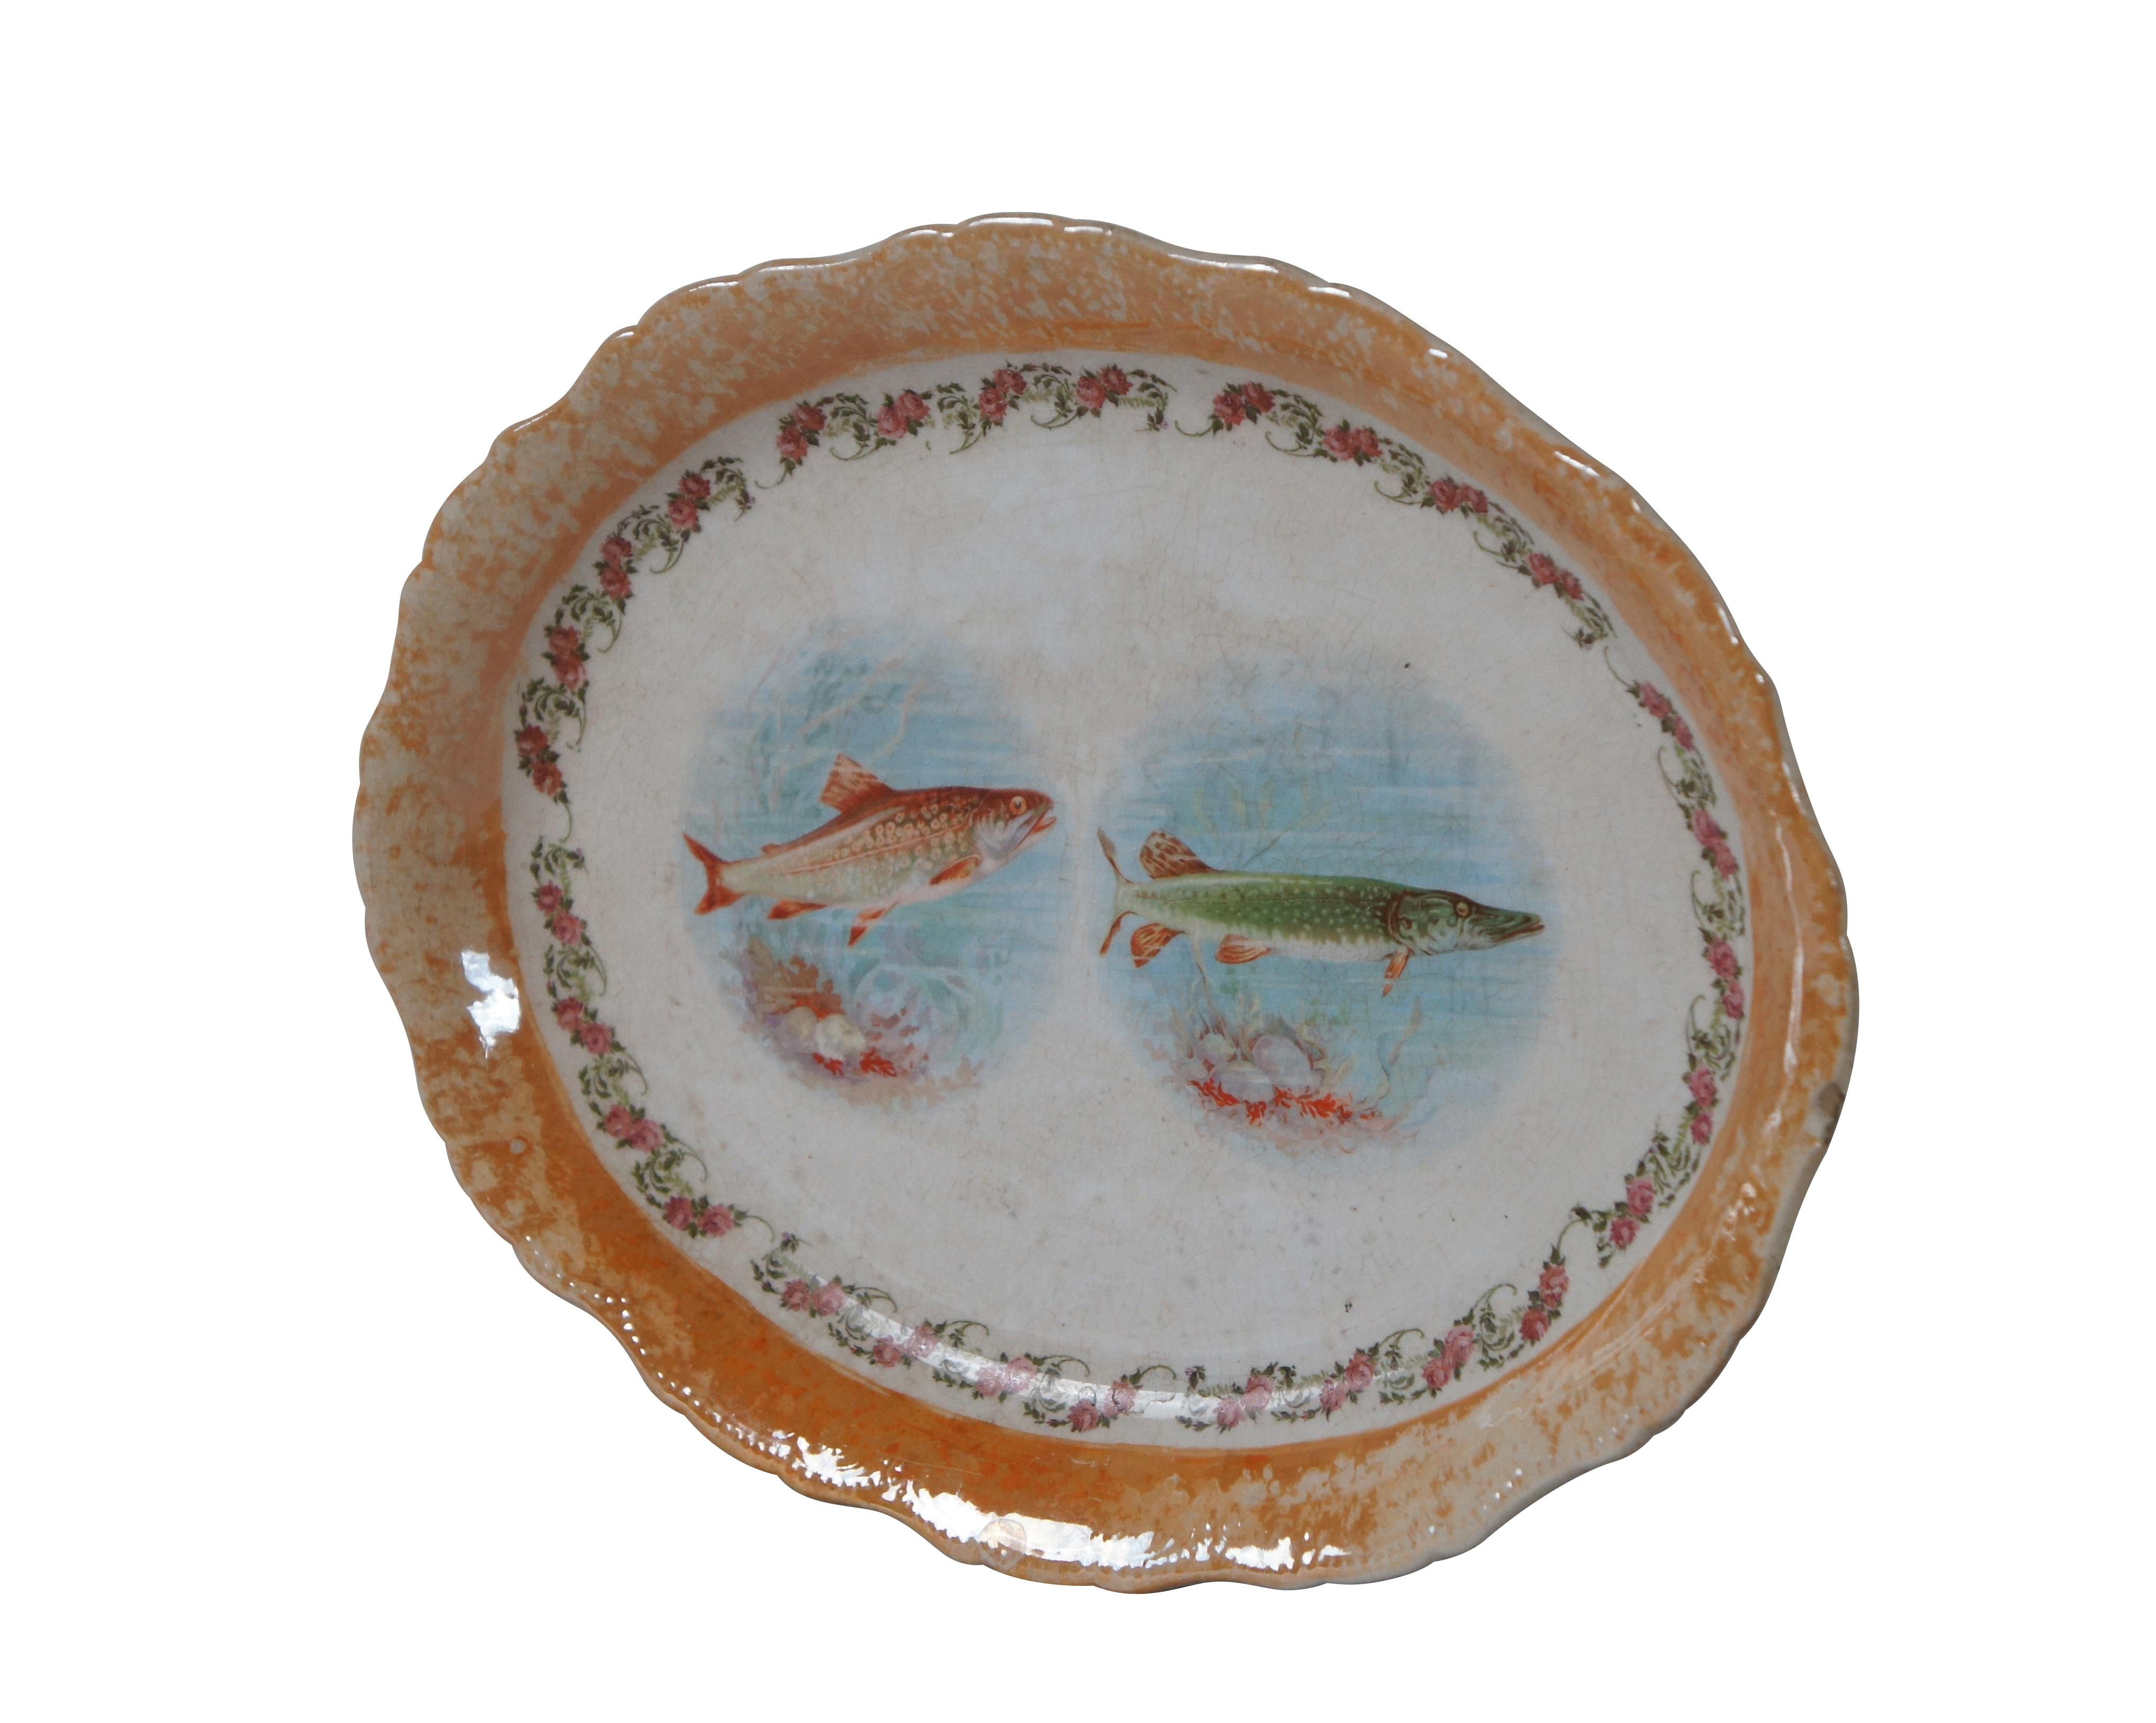 Late 19th - early 20th century semi-vitreous porcelain oval serving platter by Knowles, Taylor and Knowles. Features an iridescent orange border and transferware garland of roses around the images of a trout and a pike.

